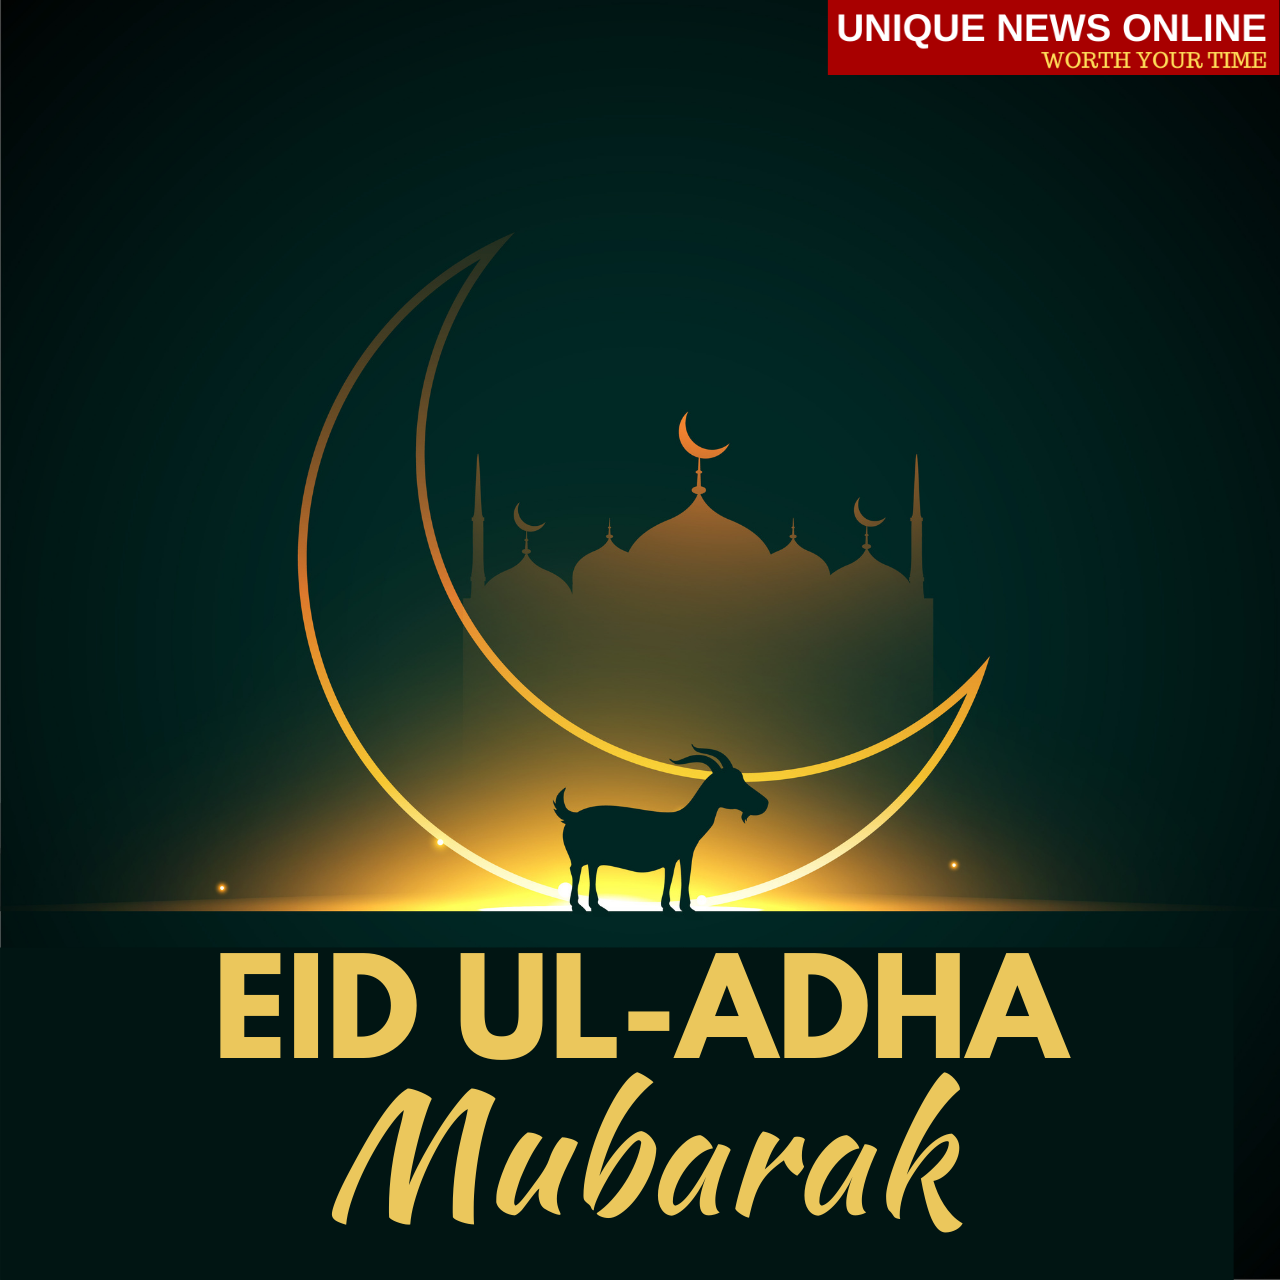 Eid ul-Adha Mubarak 2021 Arabic Wishes, Images, Quotes, Greetings, Status,  Messages, and Dua to greet